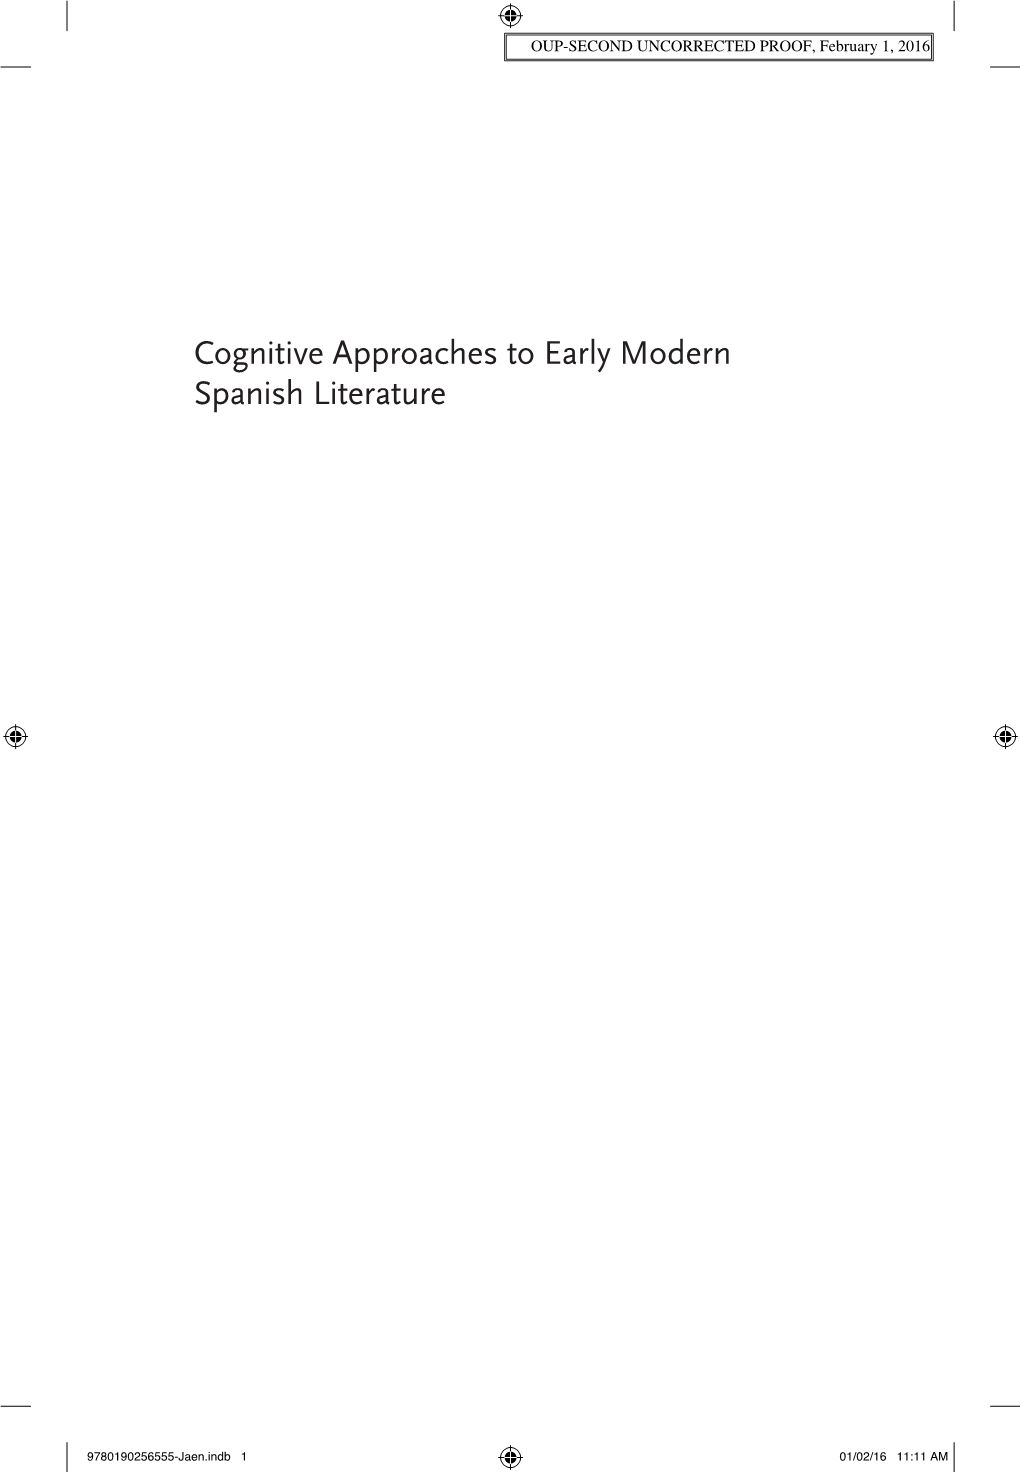 Cognitive Approaches to Early Modern Spanish Literature